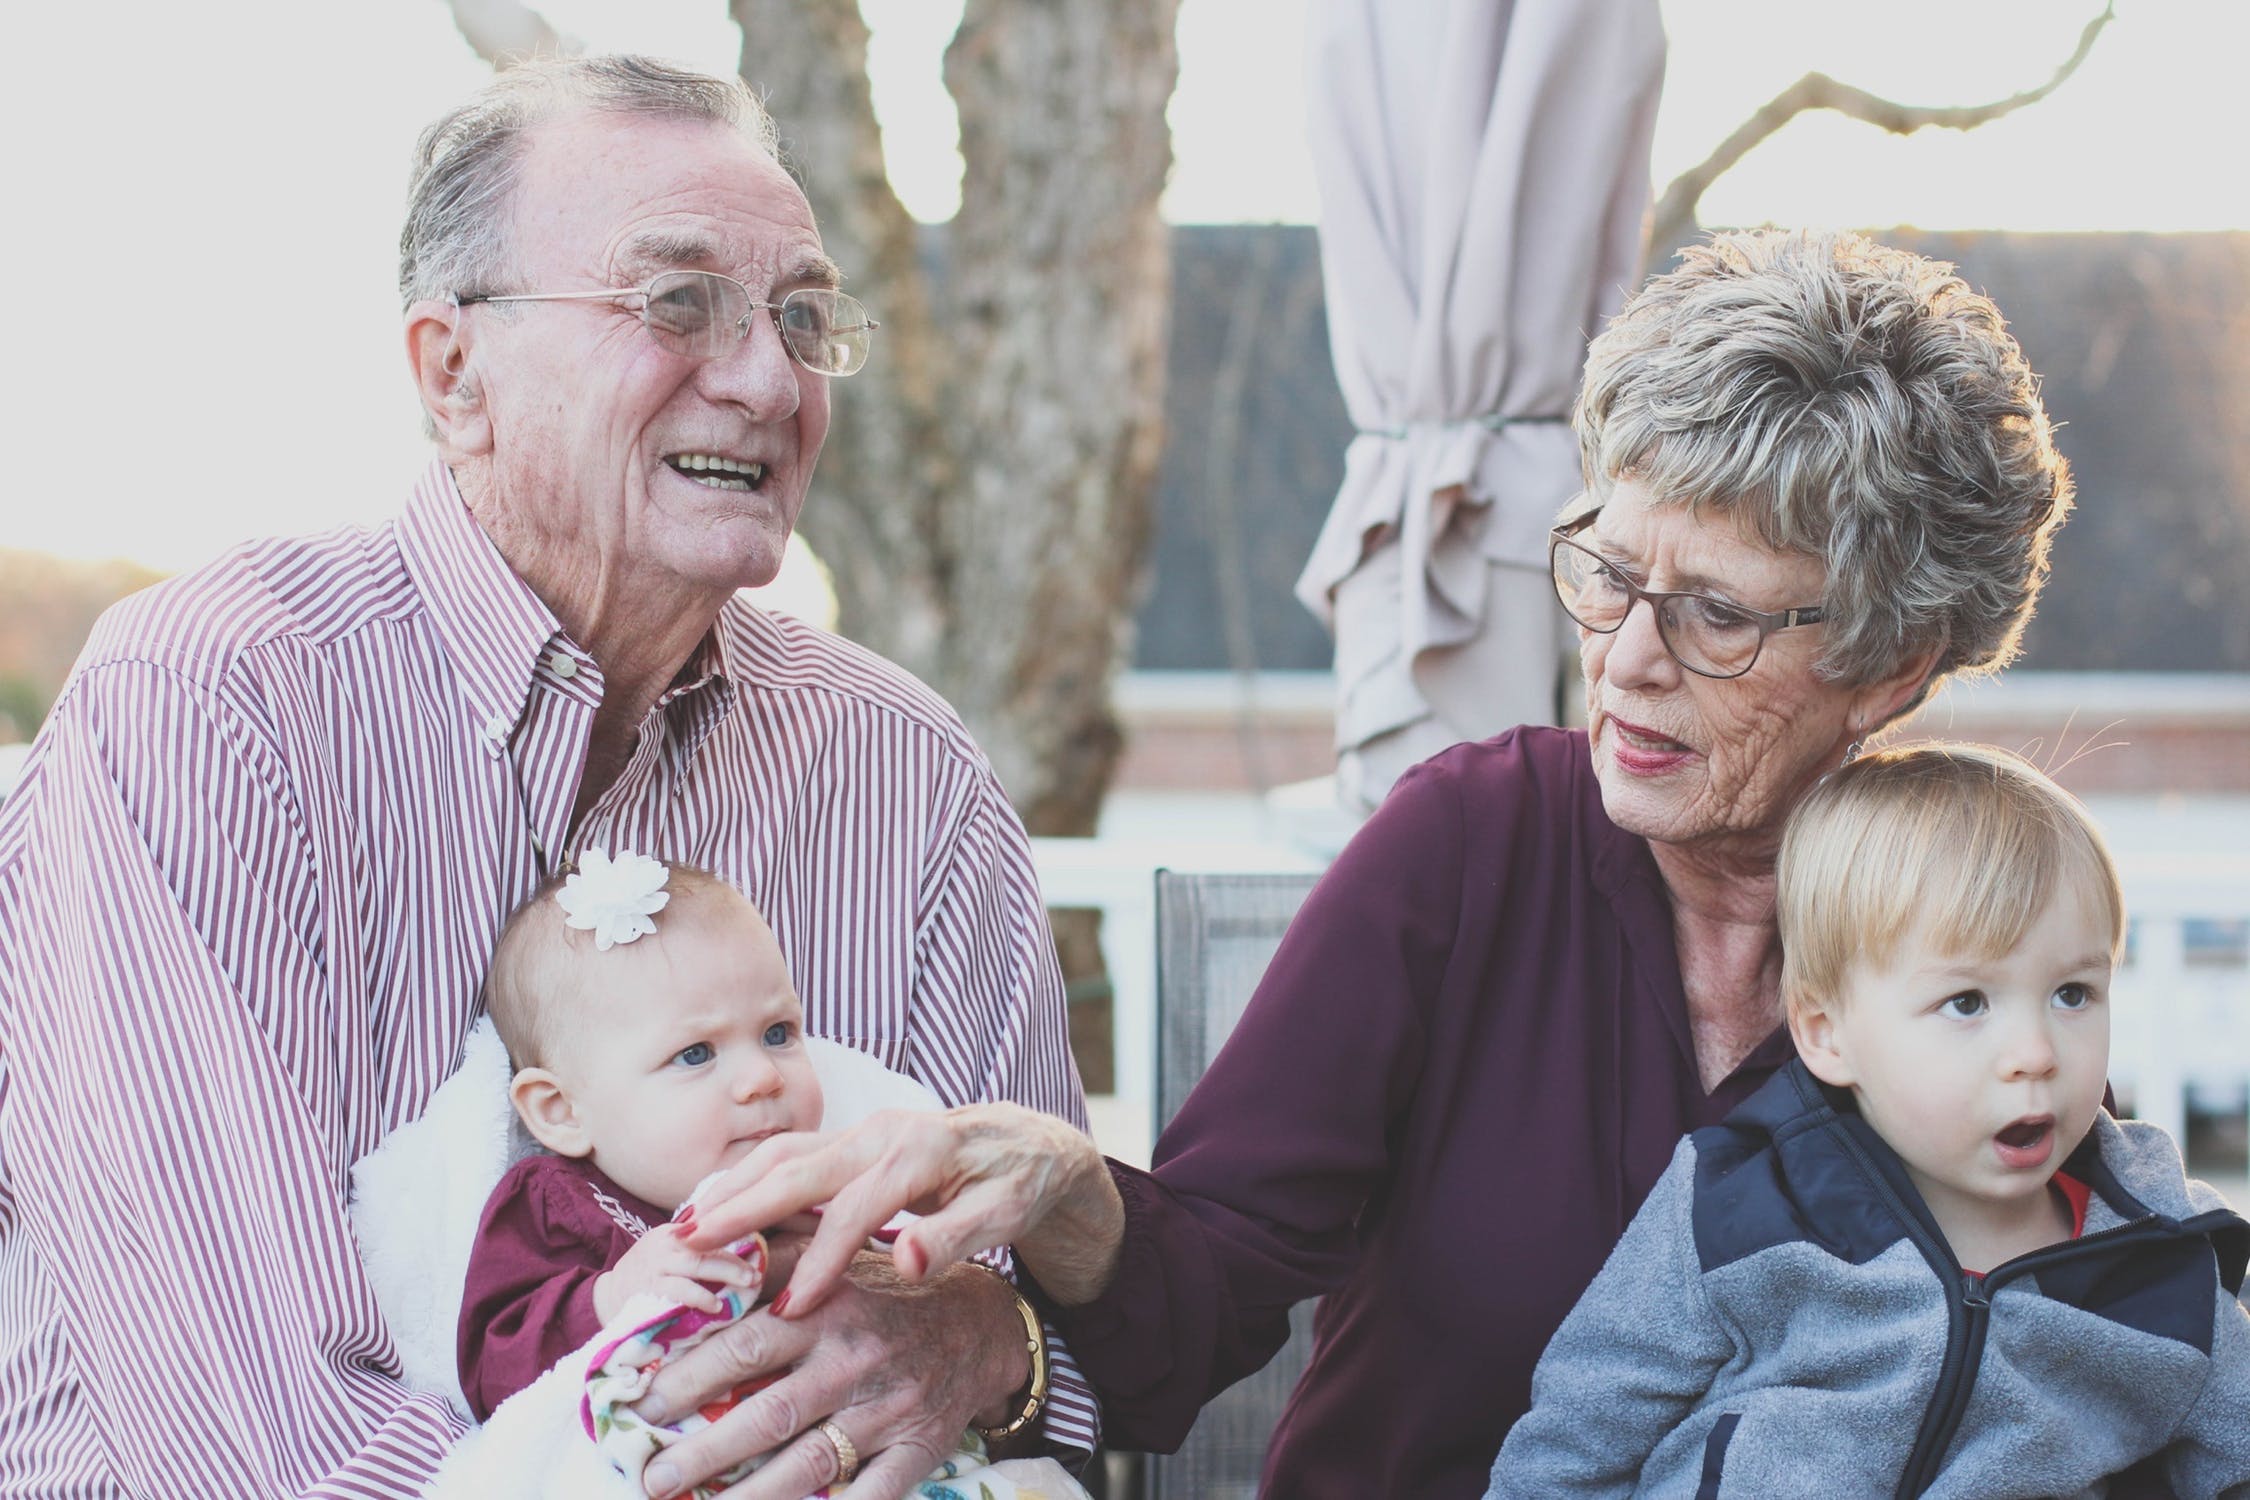 New publications: Rapid evidence review on special guardianship